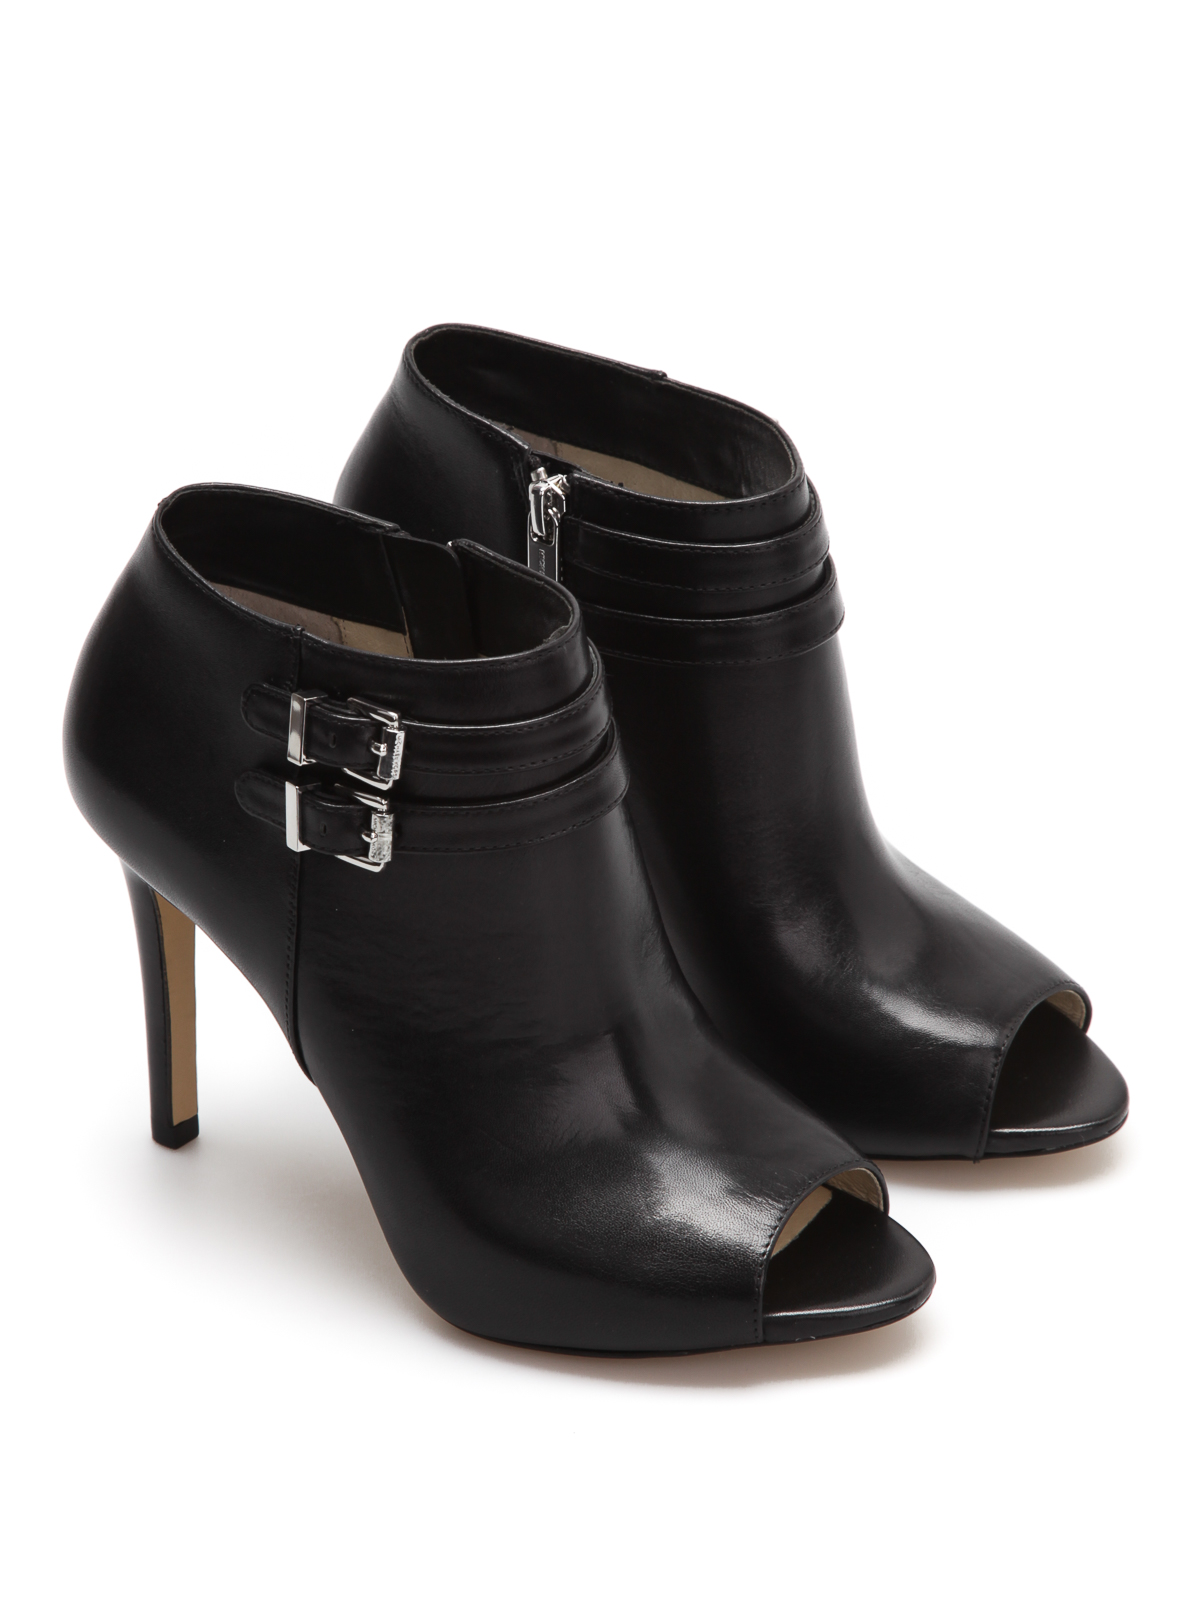 Michael Kors - Open toe leather ankle 